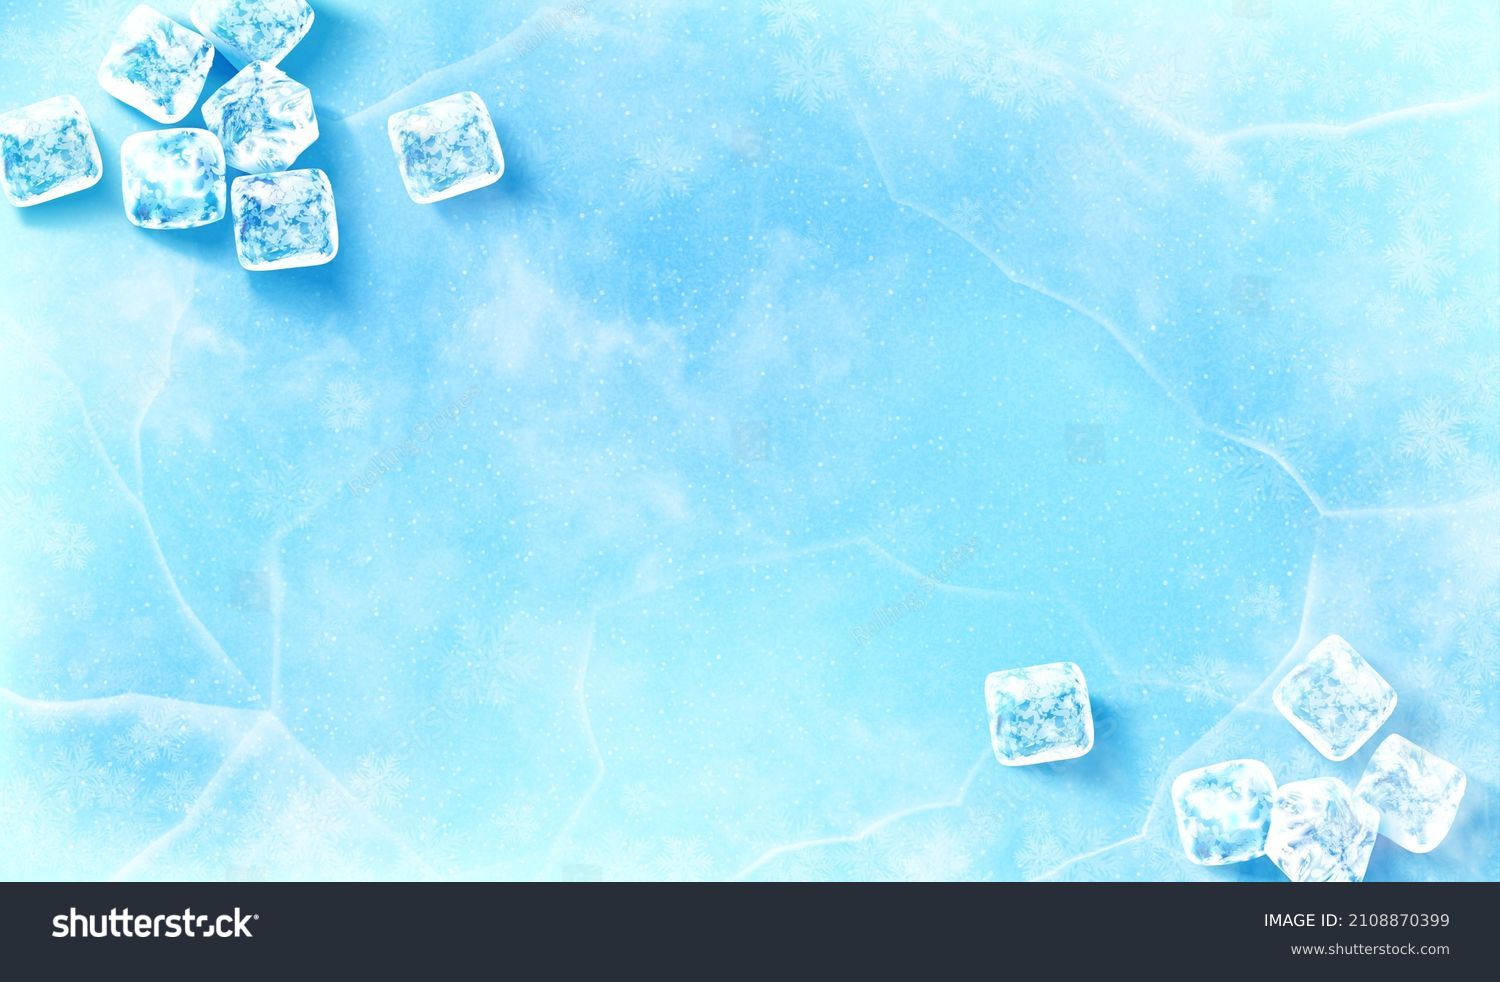 Icy surface background. 3D Illustration of groups of ice cubes scattered on upper left and bottom right of light blue surface covered in ice #2108870399